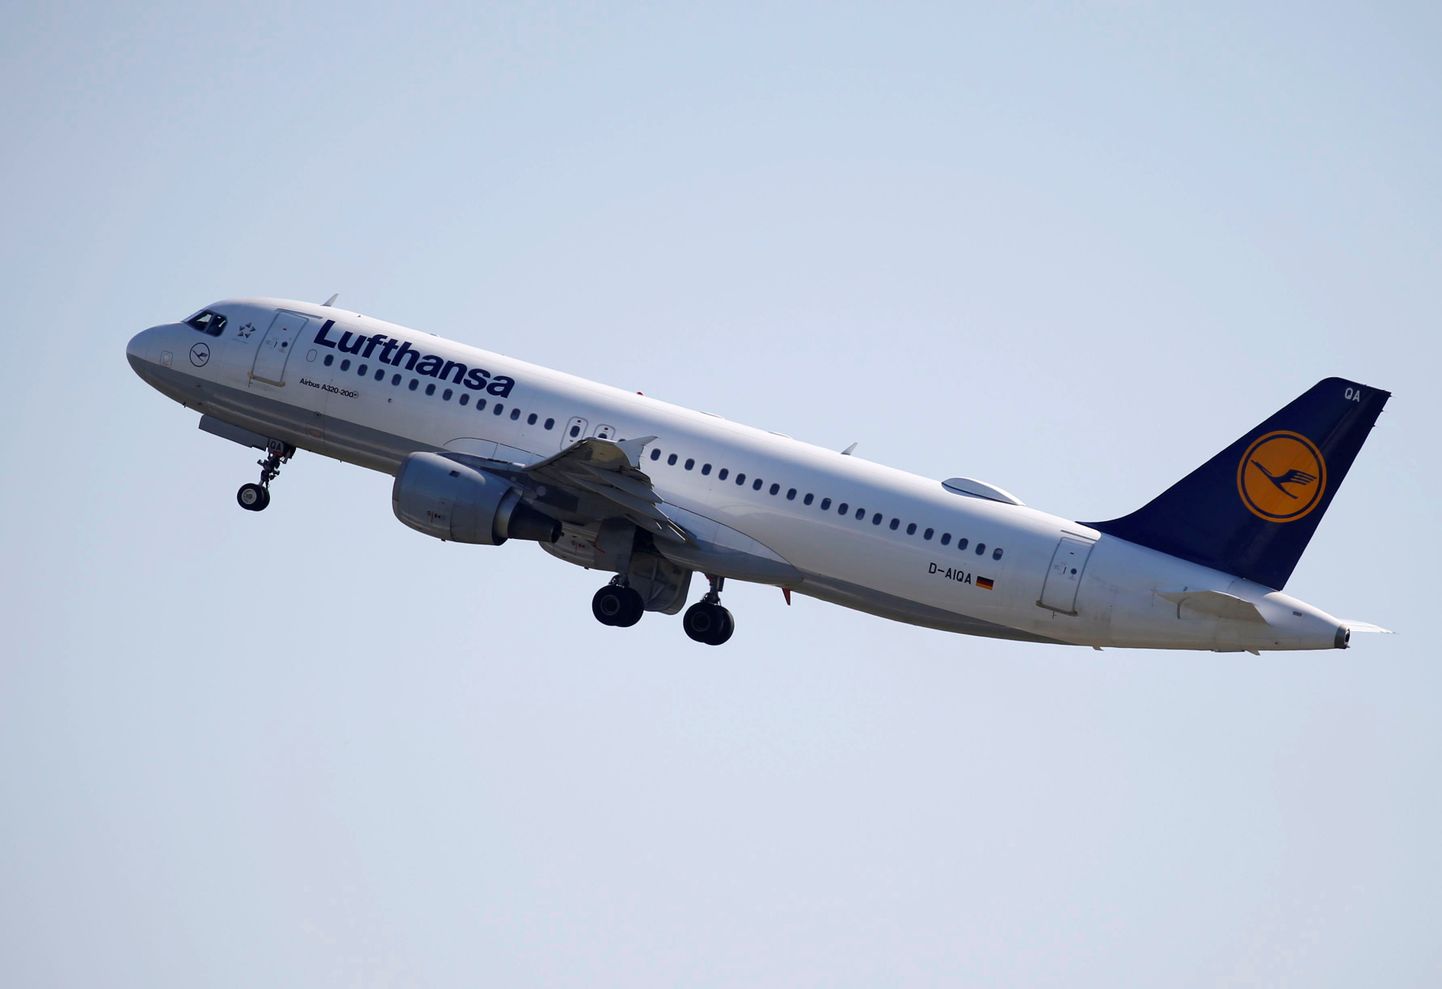 A Lufthansa Airbus A320 takes off in Colomiers near Toulouse, France, July 19, 2018. REUTERS/Regis Duvignau